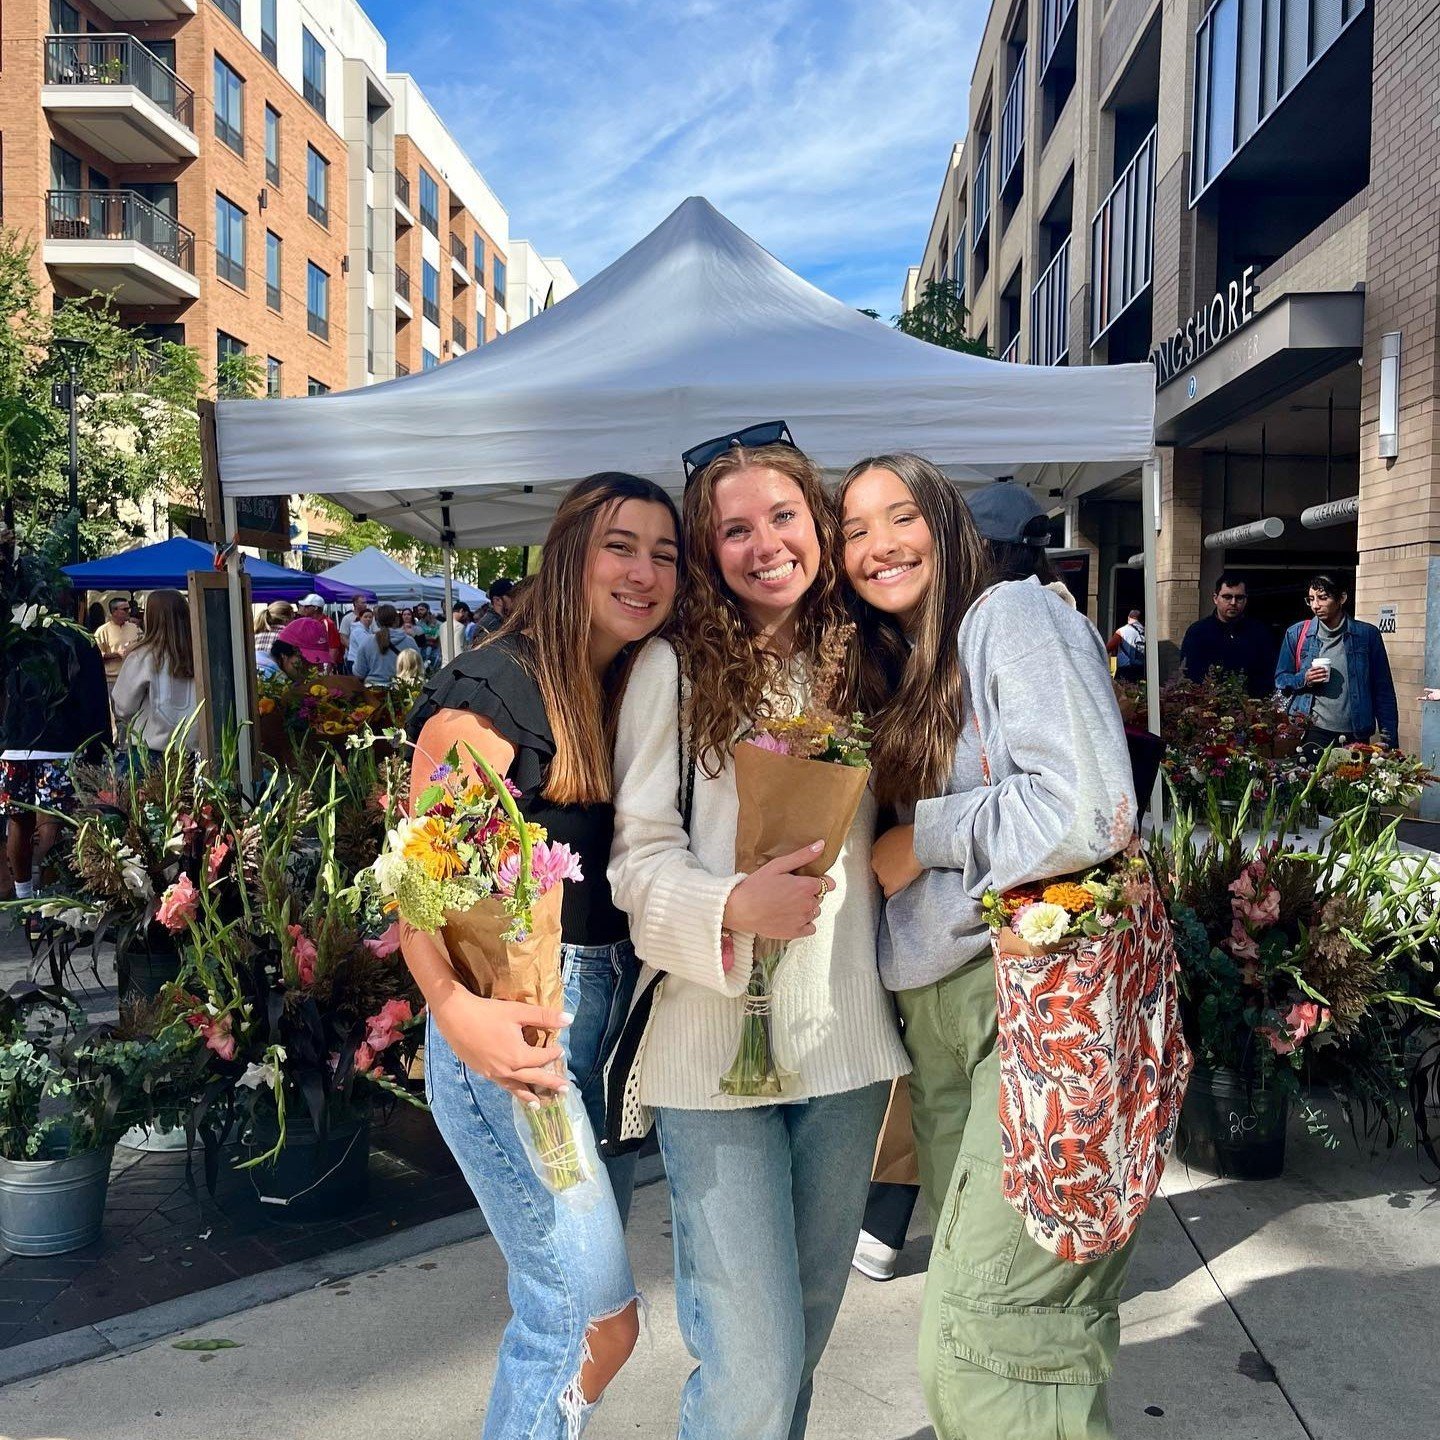 We're only ONE day away from market season #atbridgepark! Who's excited to stop and smell the fresh blooms this weekend at @thedublinmarket? 🌸💐